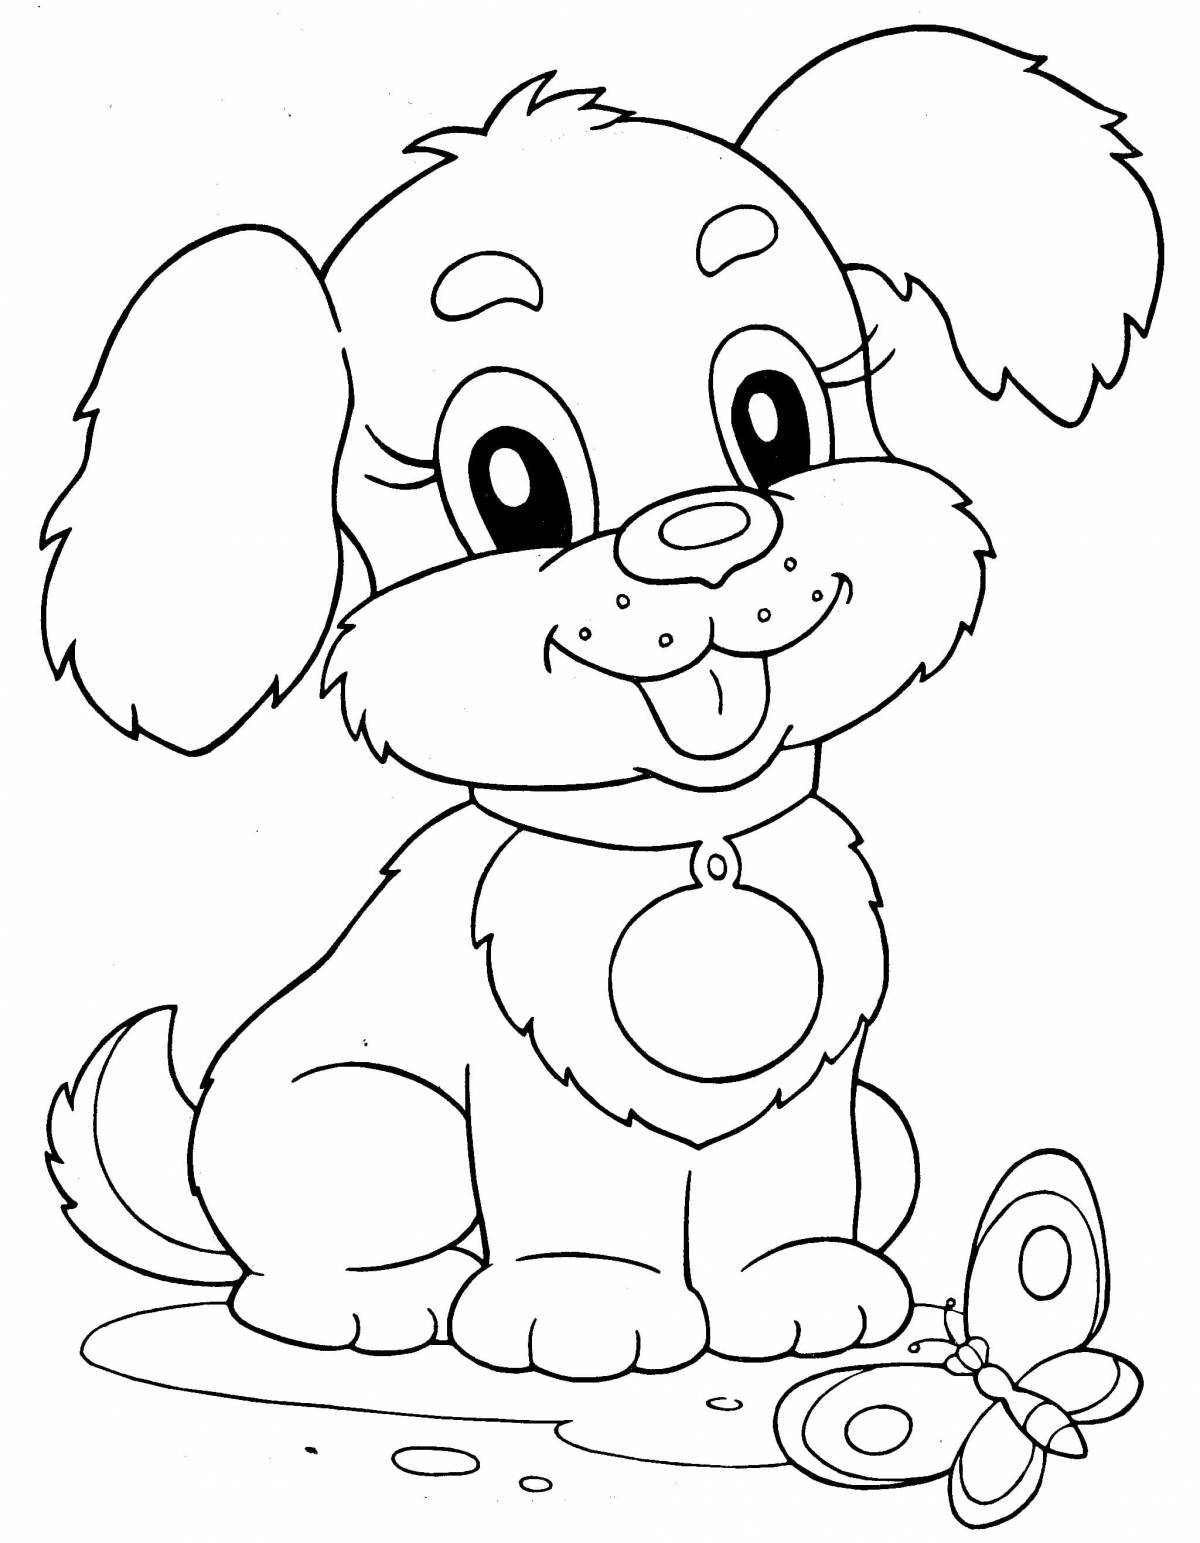 Luminous animal coloring pages for kids 5-6 years old